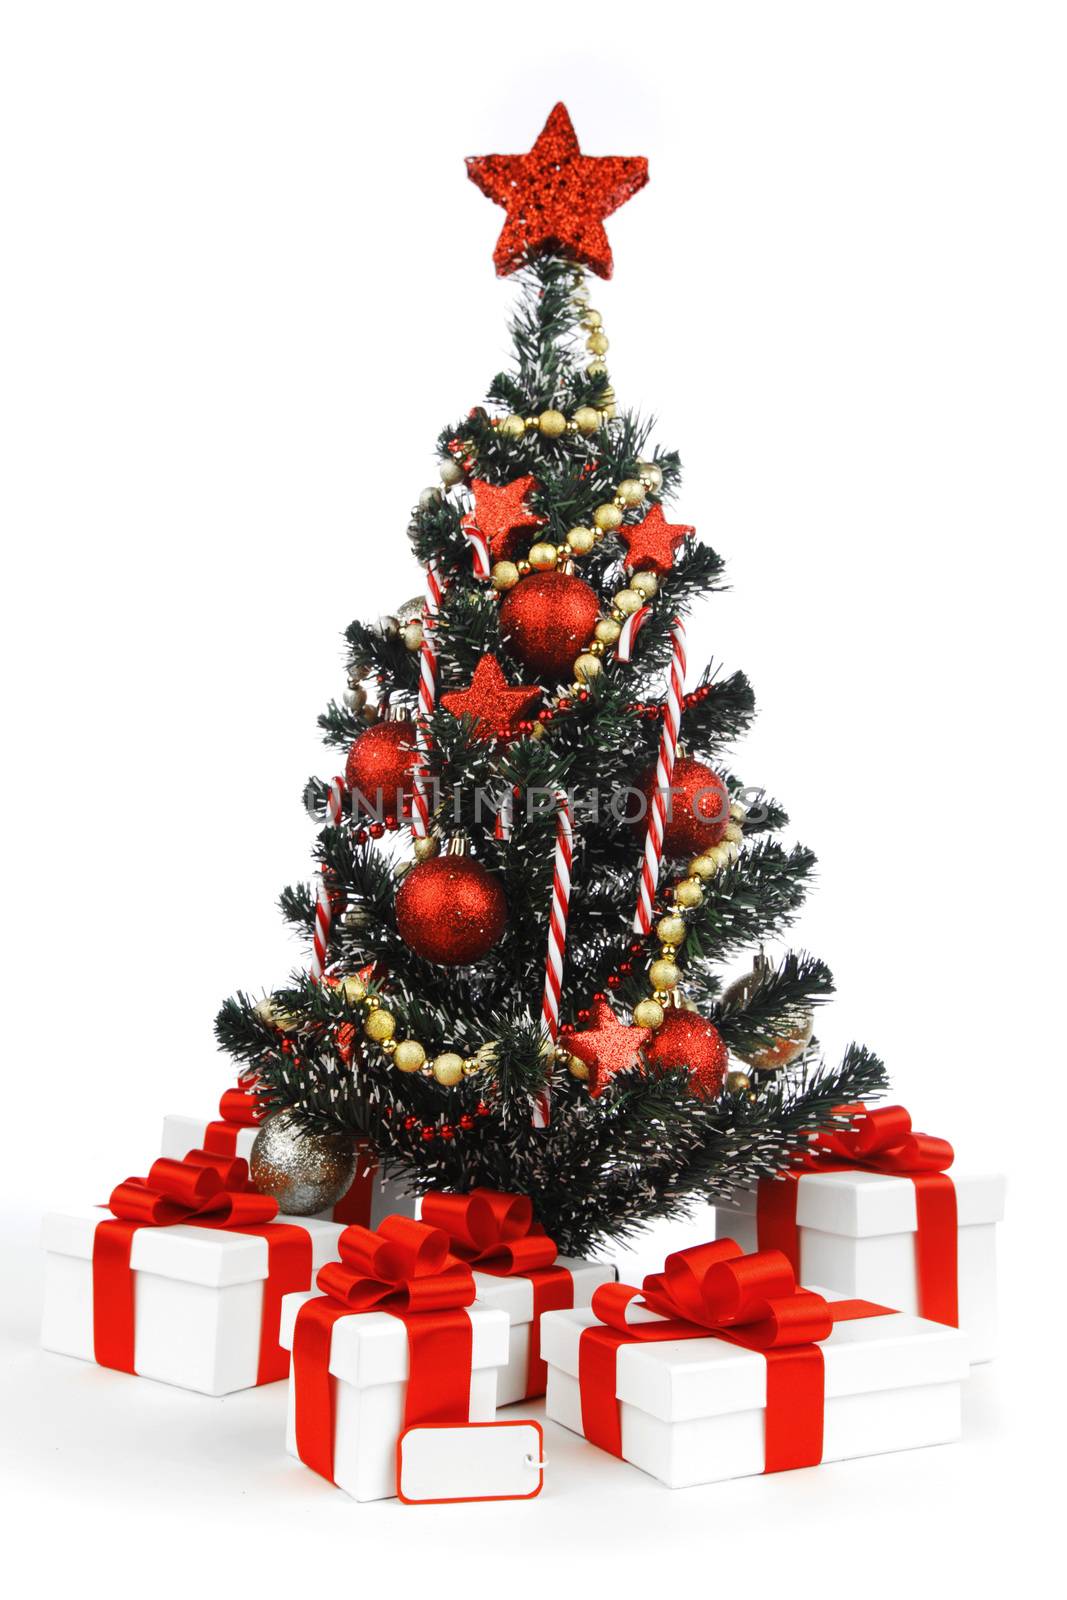 Decorated Christmas tree and presents isolated on white background